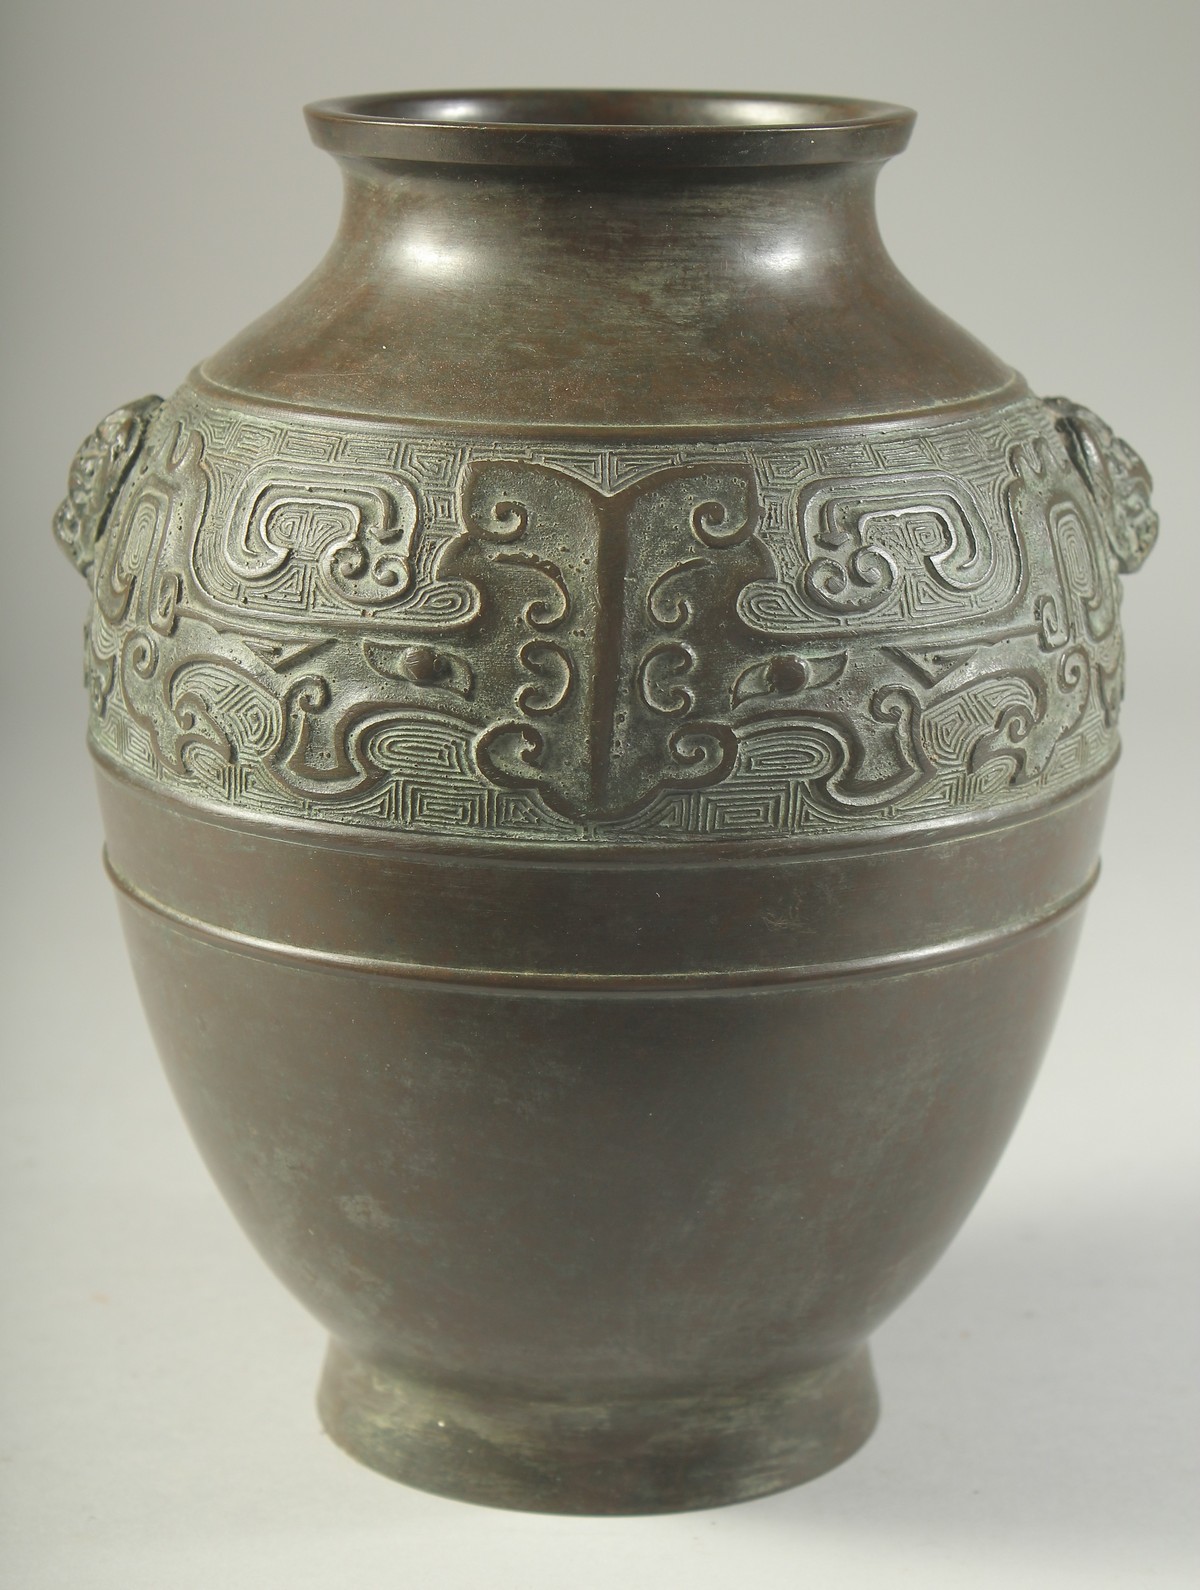 A CHINESE BRONZE VASE, with a band of archaic design and twin beast-head handles, 22cm high. - Image 3 of 6